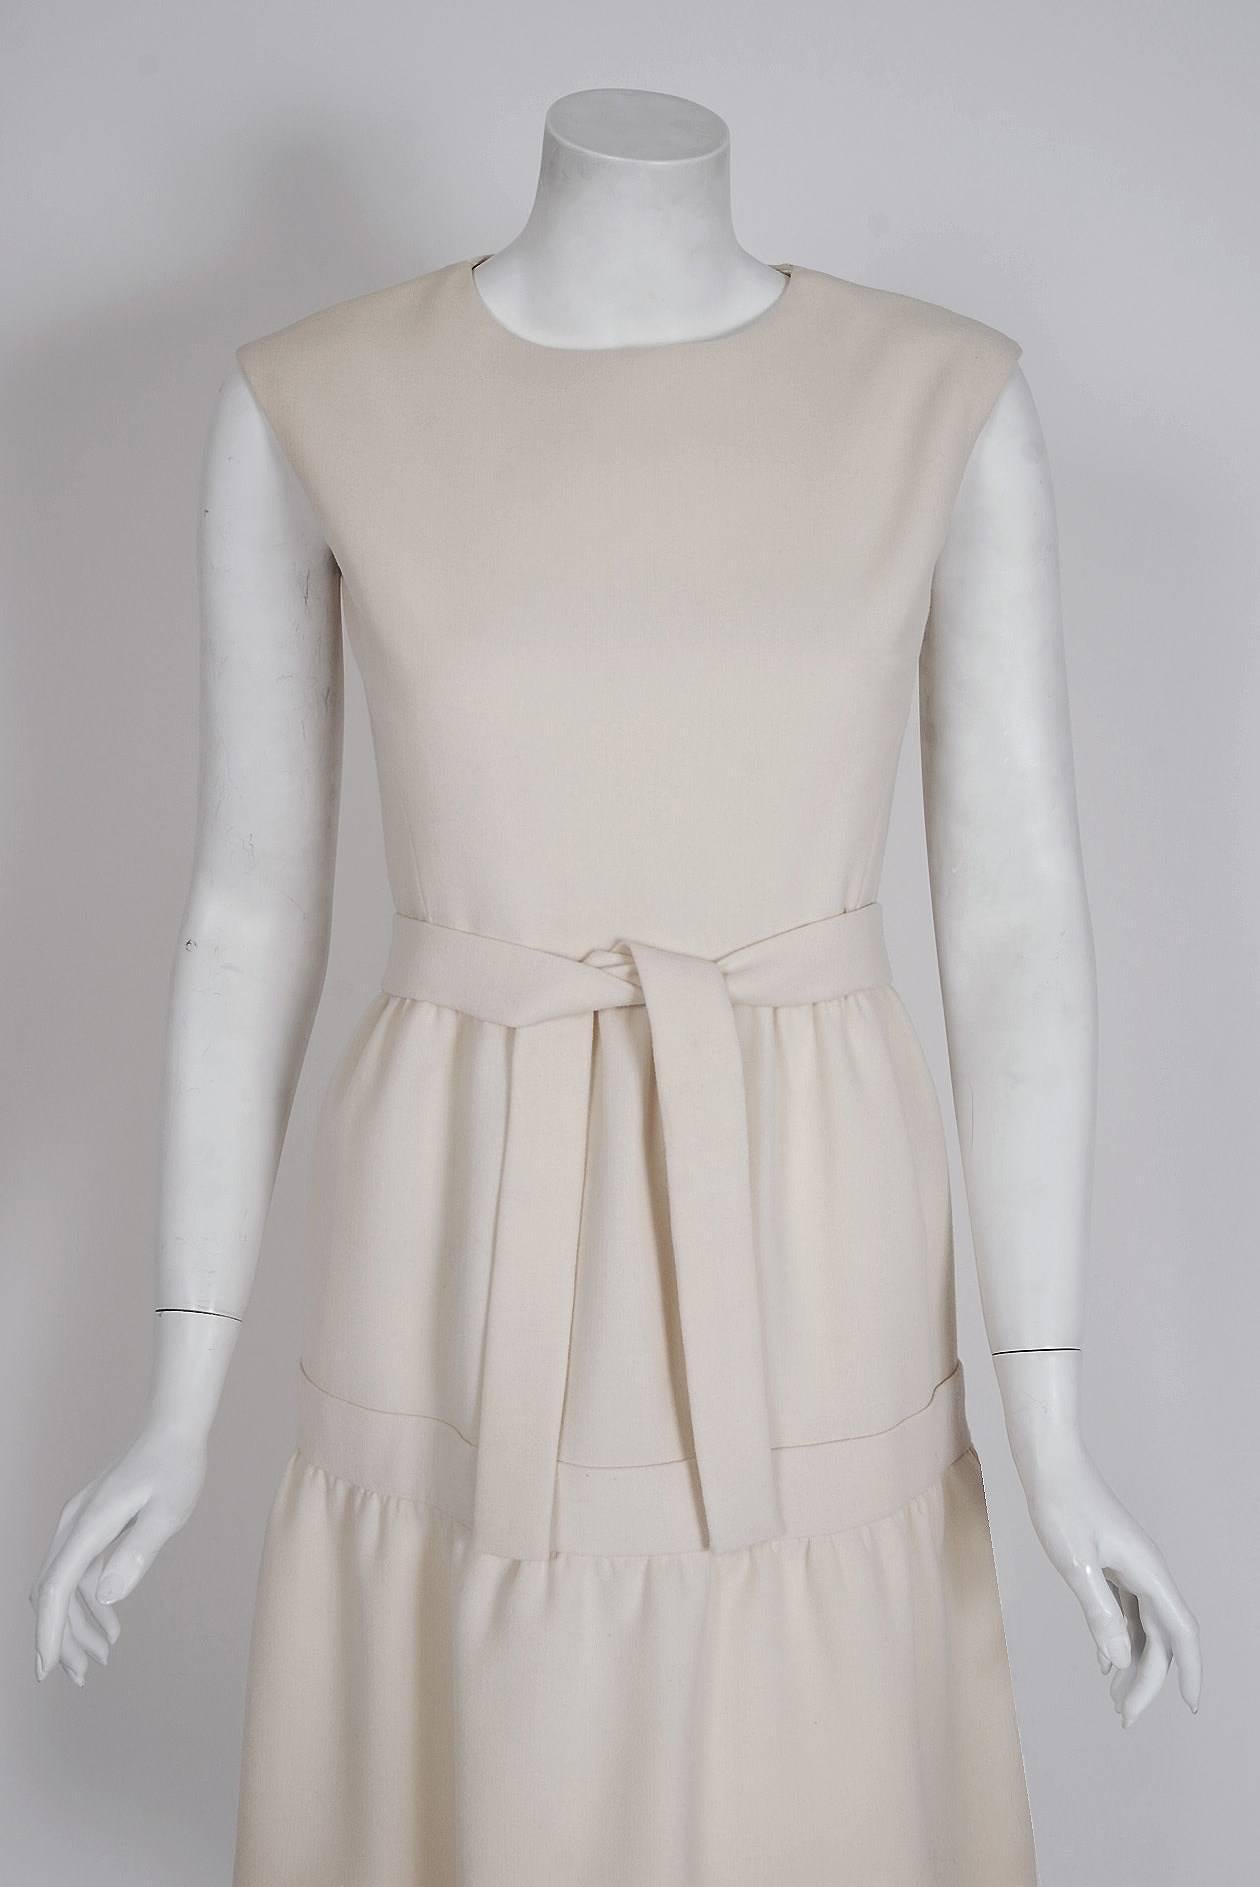 Spectacular mid 1960's Pierre Cardin designer dress in a rich ivory-white tailored wool. In 1951 Cardin opened his own couture house and by 1957, he started a ready-to-wear line; a bold move for a French couturier at the time. The look most